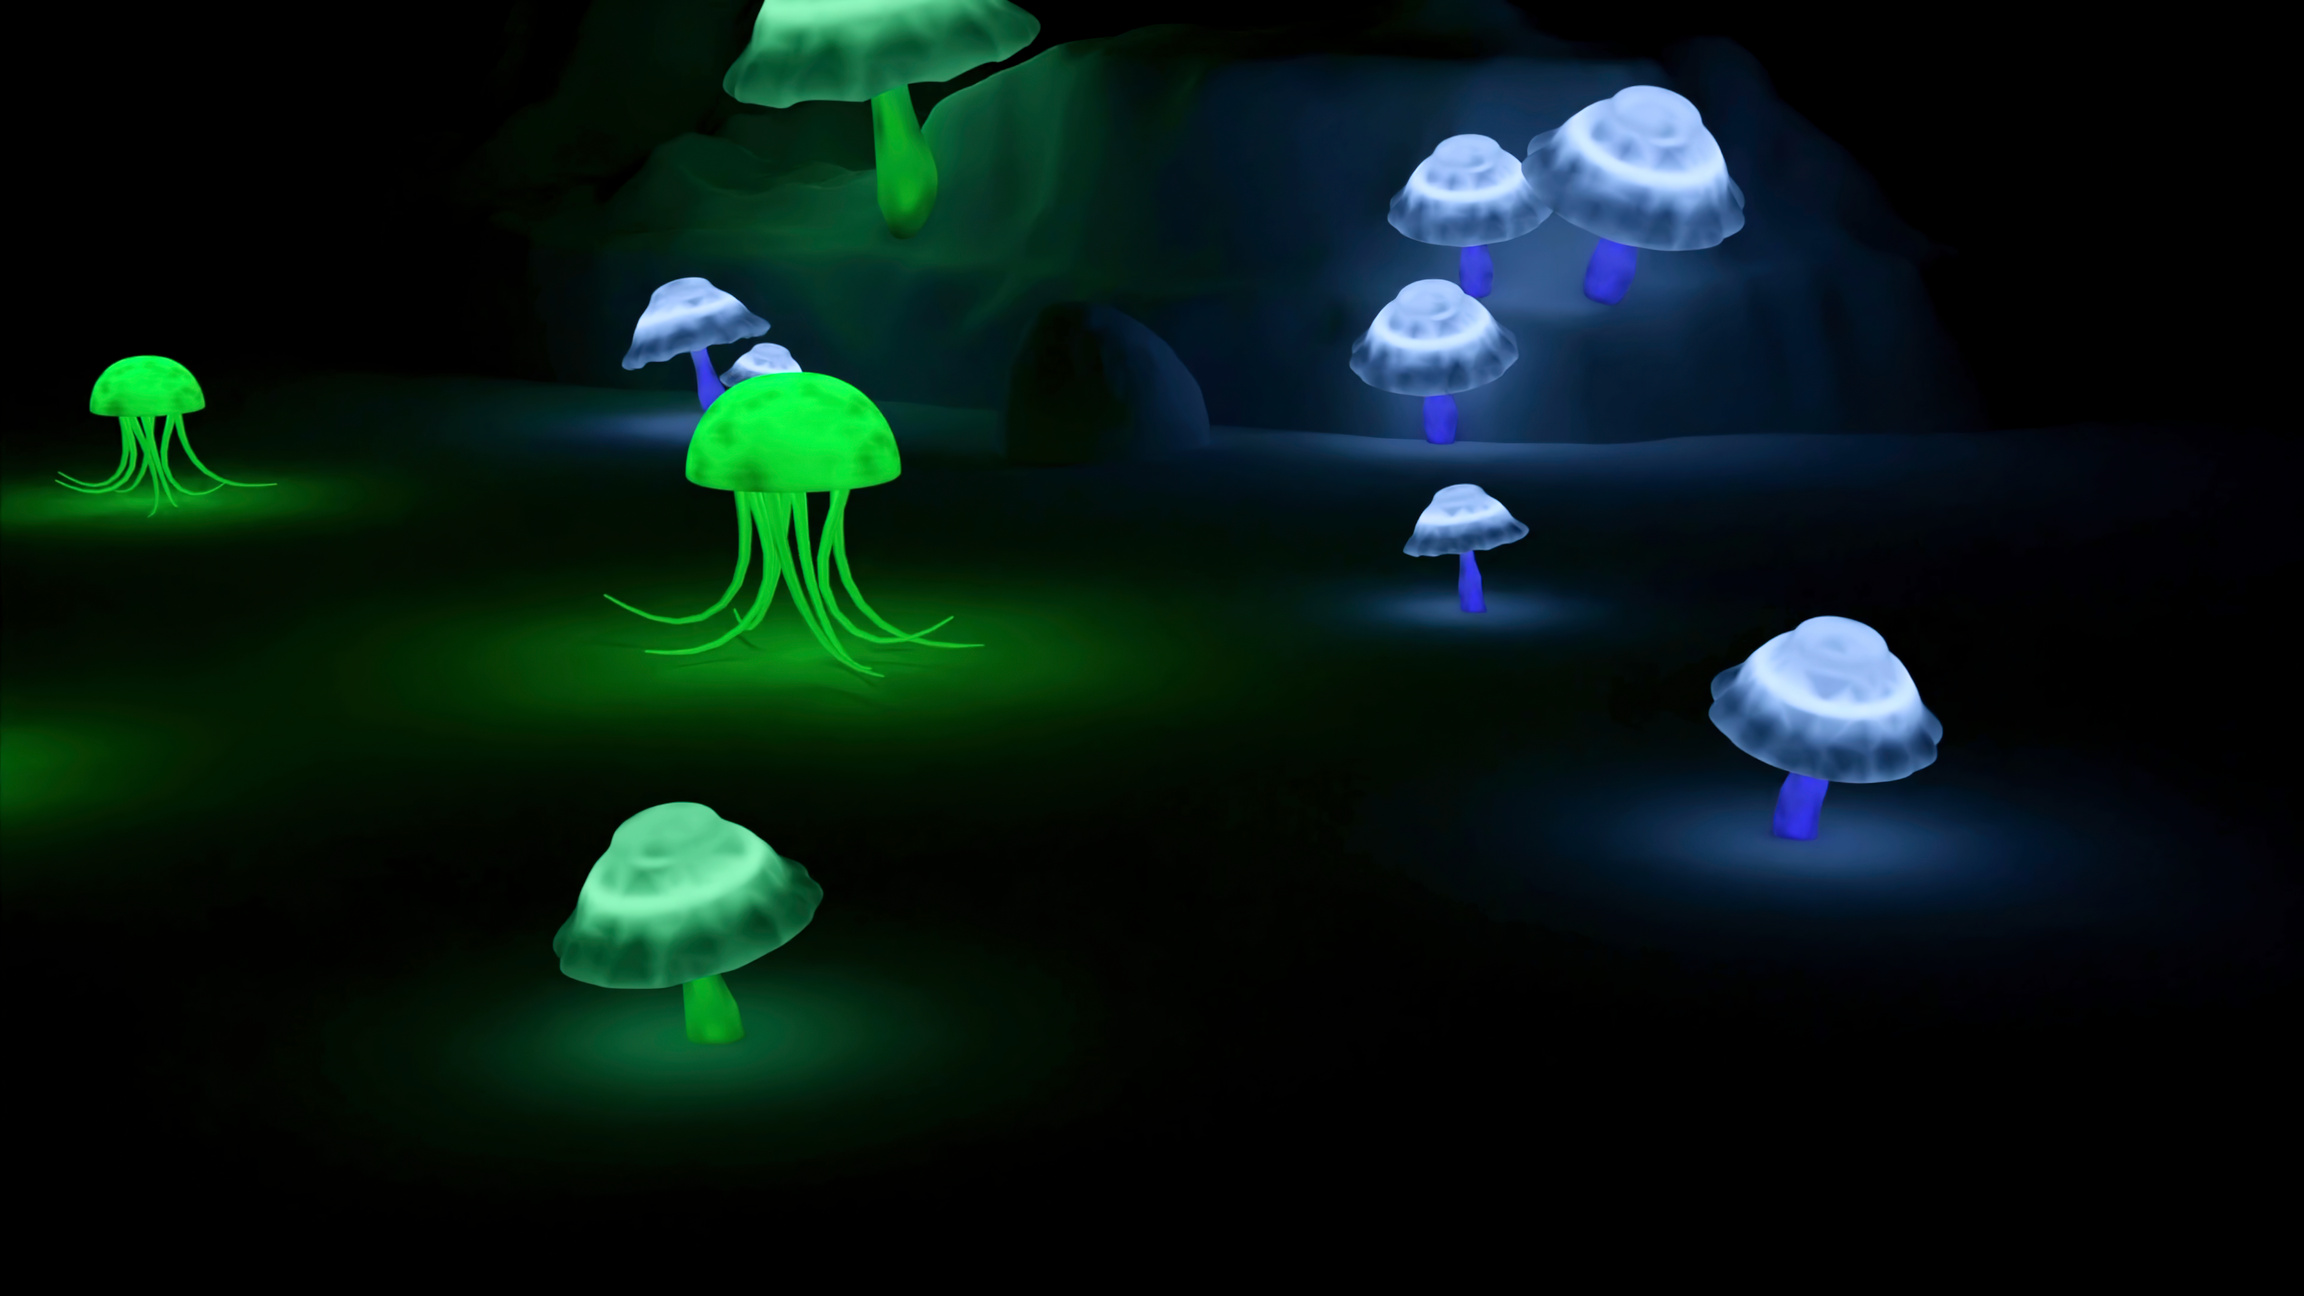 Psychedelic Animation with Neon Mushrooms. Design. Animation with Moving Jellyfish and Neon Mushrooms on Black Background. Moving Neon Mushrooms. Psychedelic Drugs